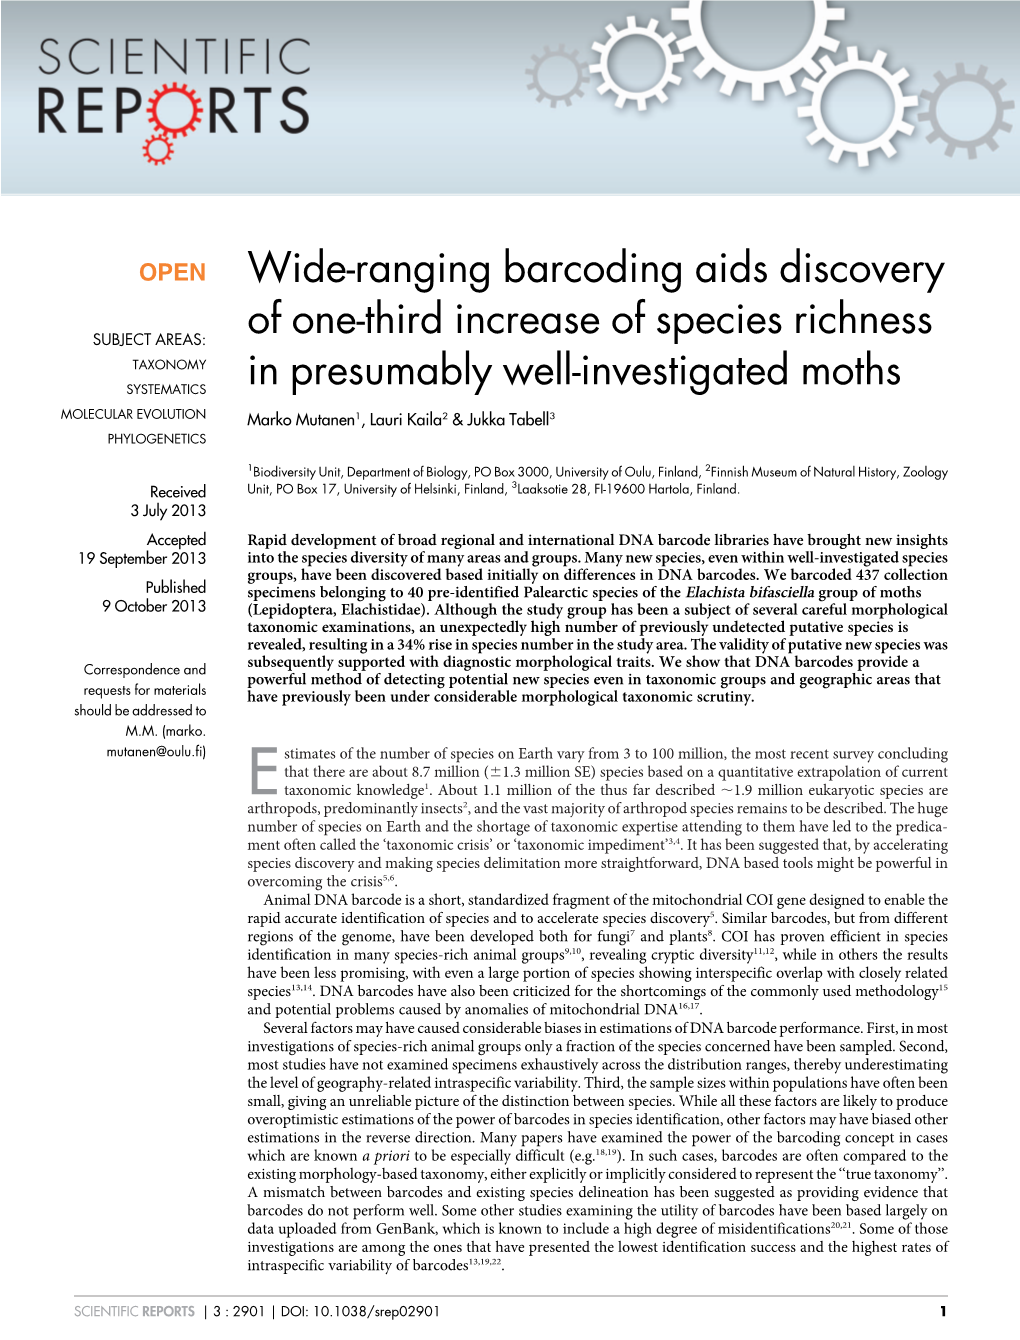 Wide-Ranging Barcoding Aids Discovery of One-Third Increase Of